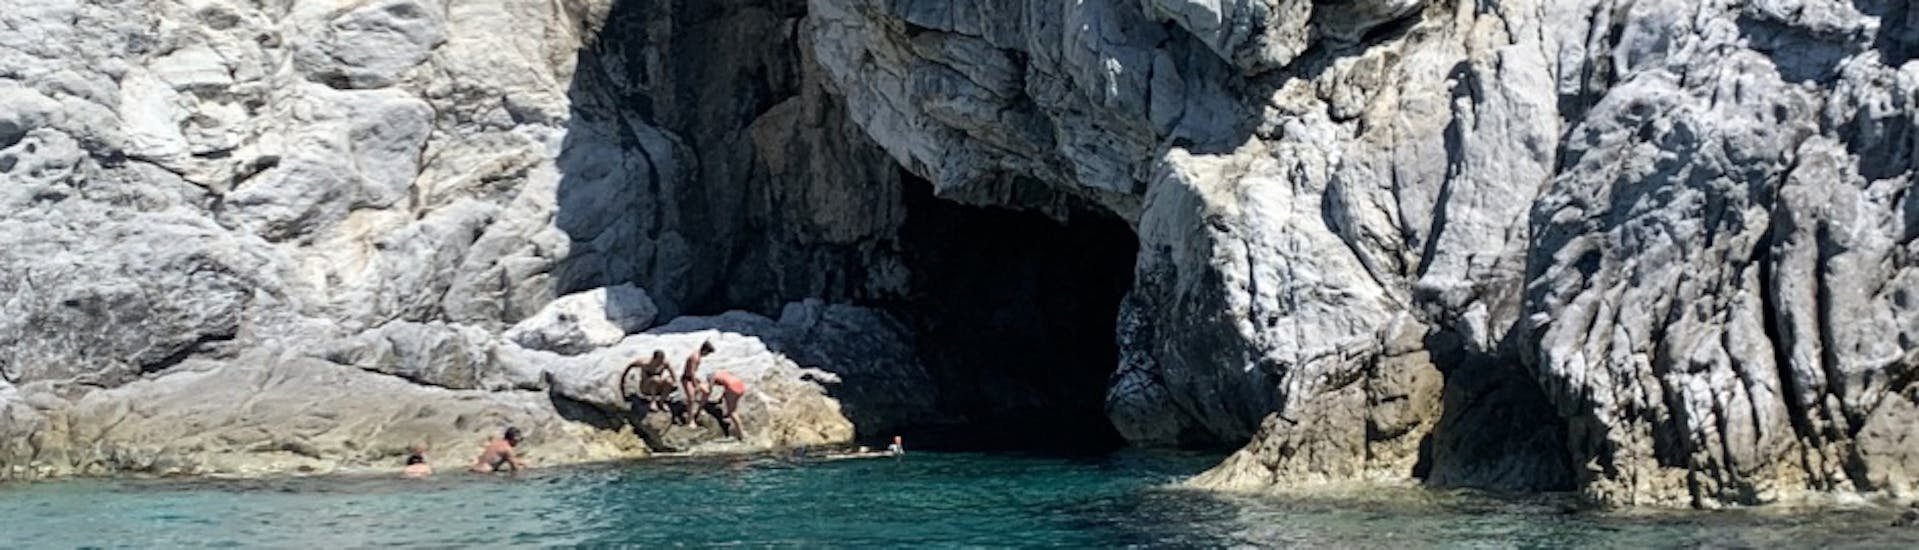 View of Blue Grotto during our private Boat Trip along the Southern Coast of Elba with Baiarda Dive Boat Excursions Elba.